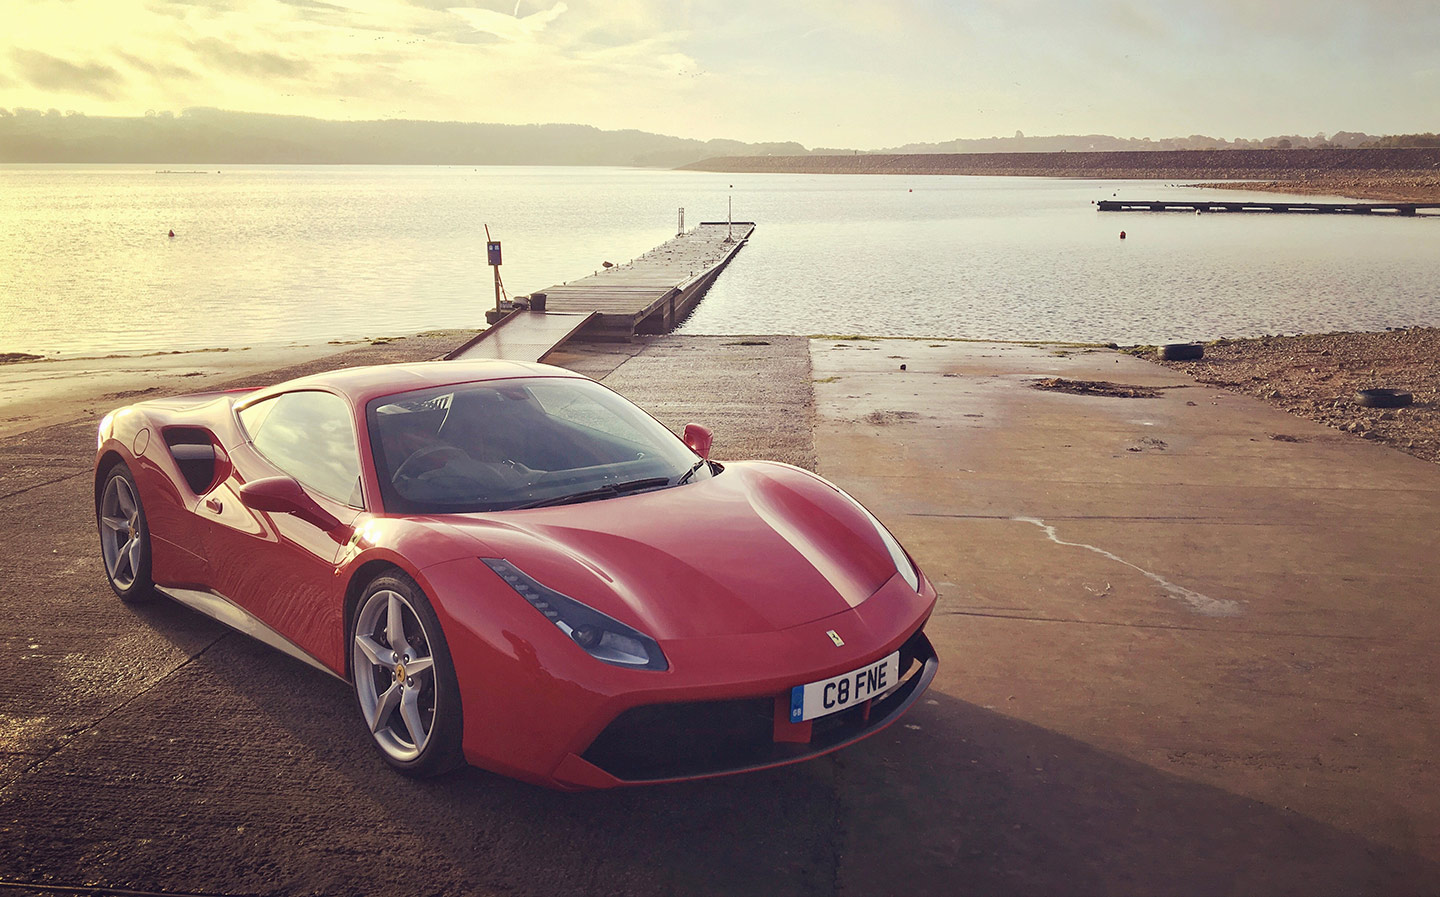 Supersport Supercars: Wrapping up the Caterham series with a Ferrari 488 GTB